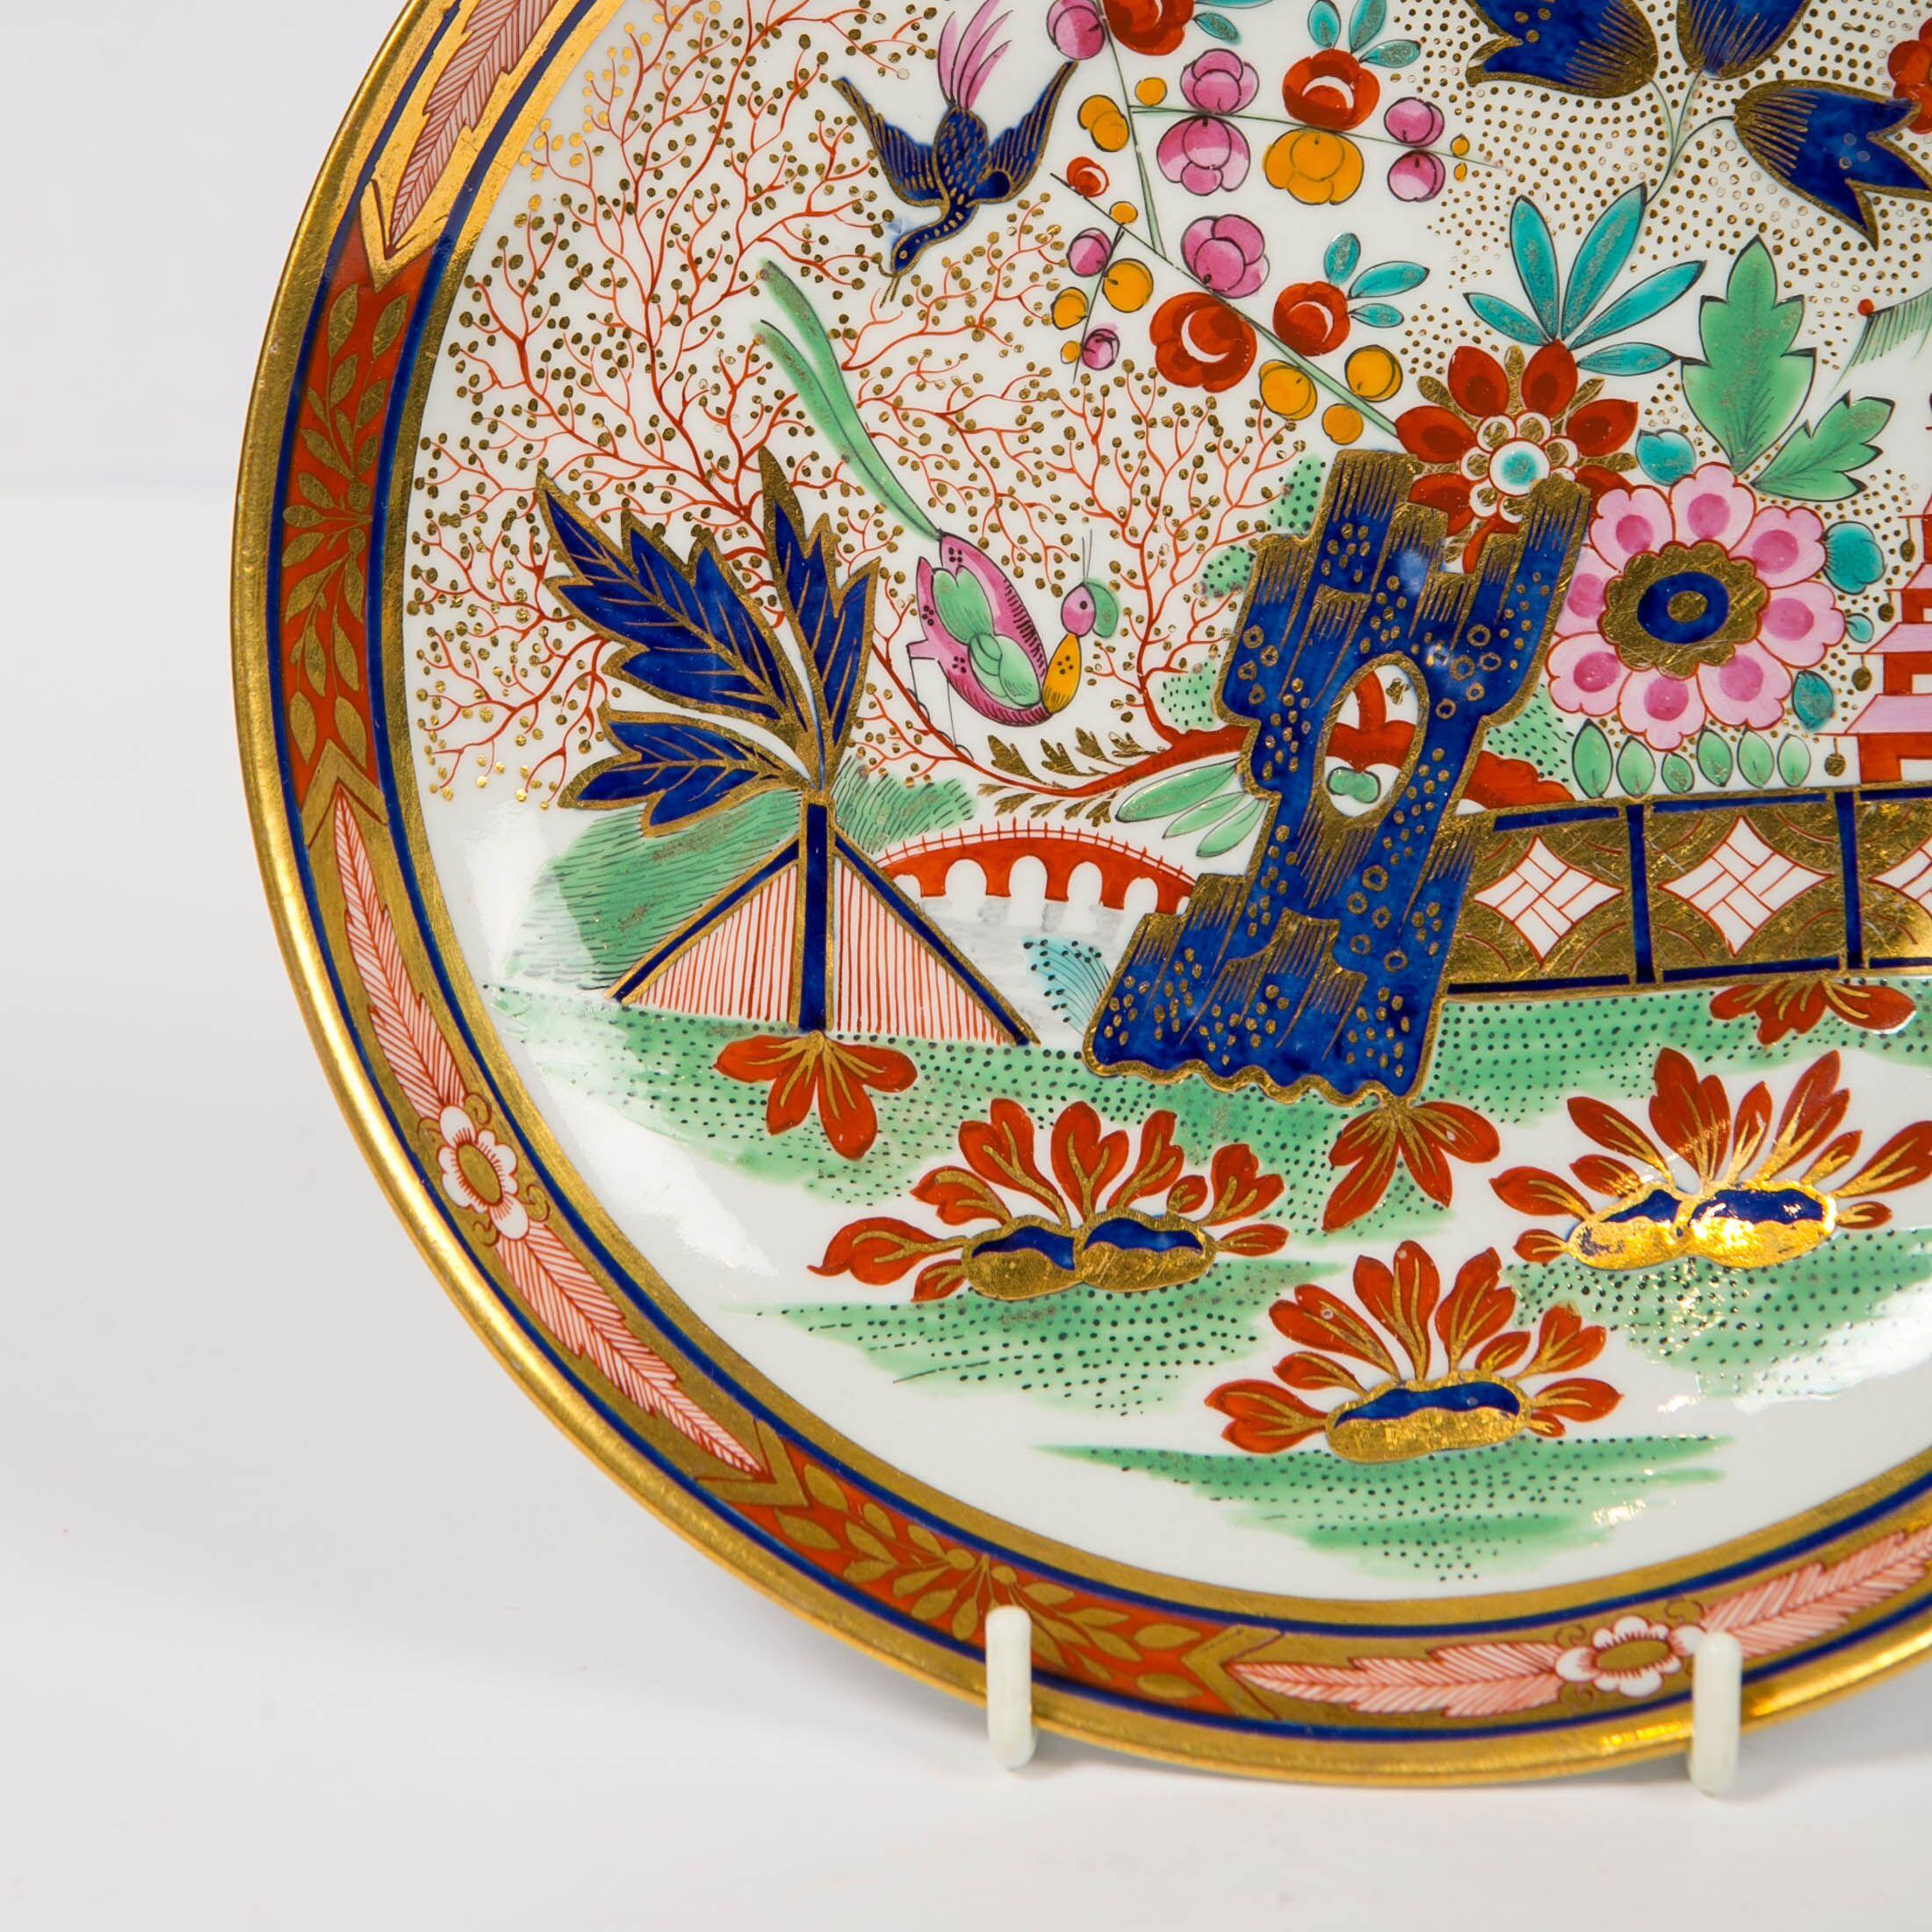 Hand-Painted Worcester Fence Pattern Dish Made in England Between 1792-1803